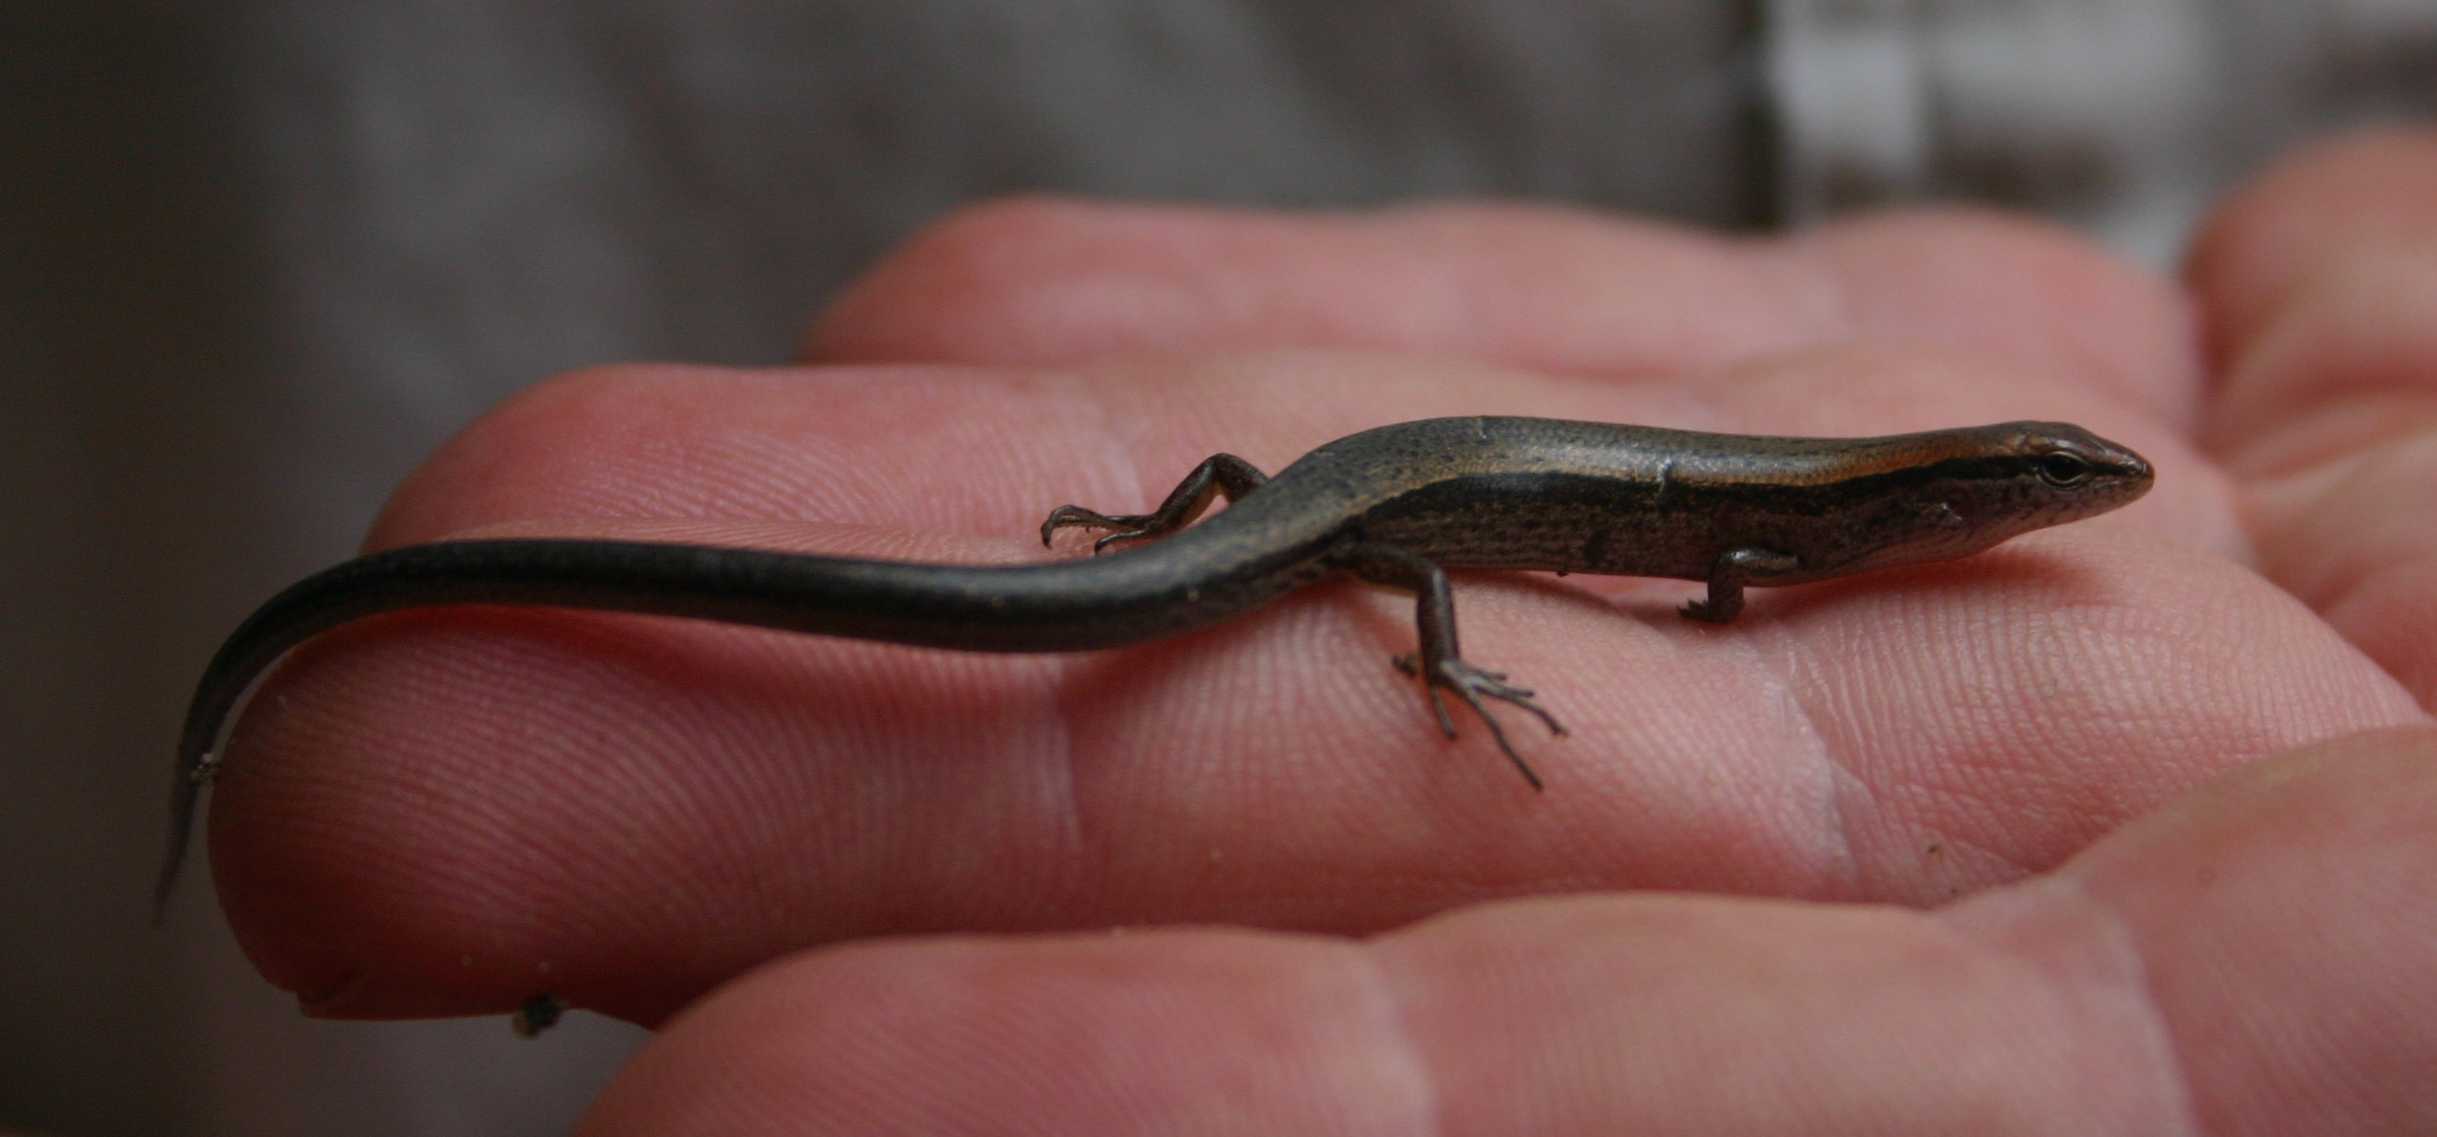 typical sized ground skink in my hand